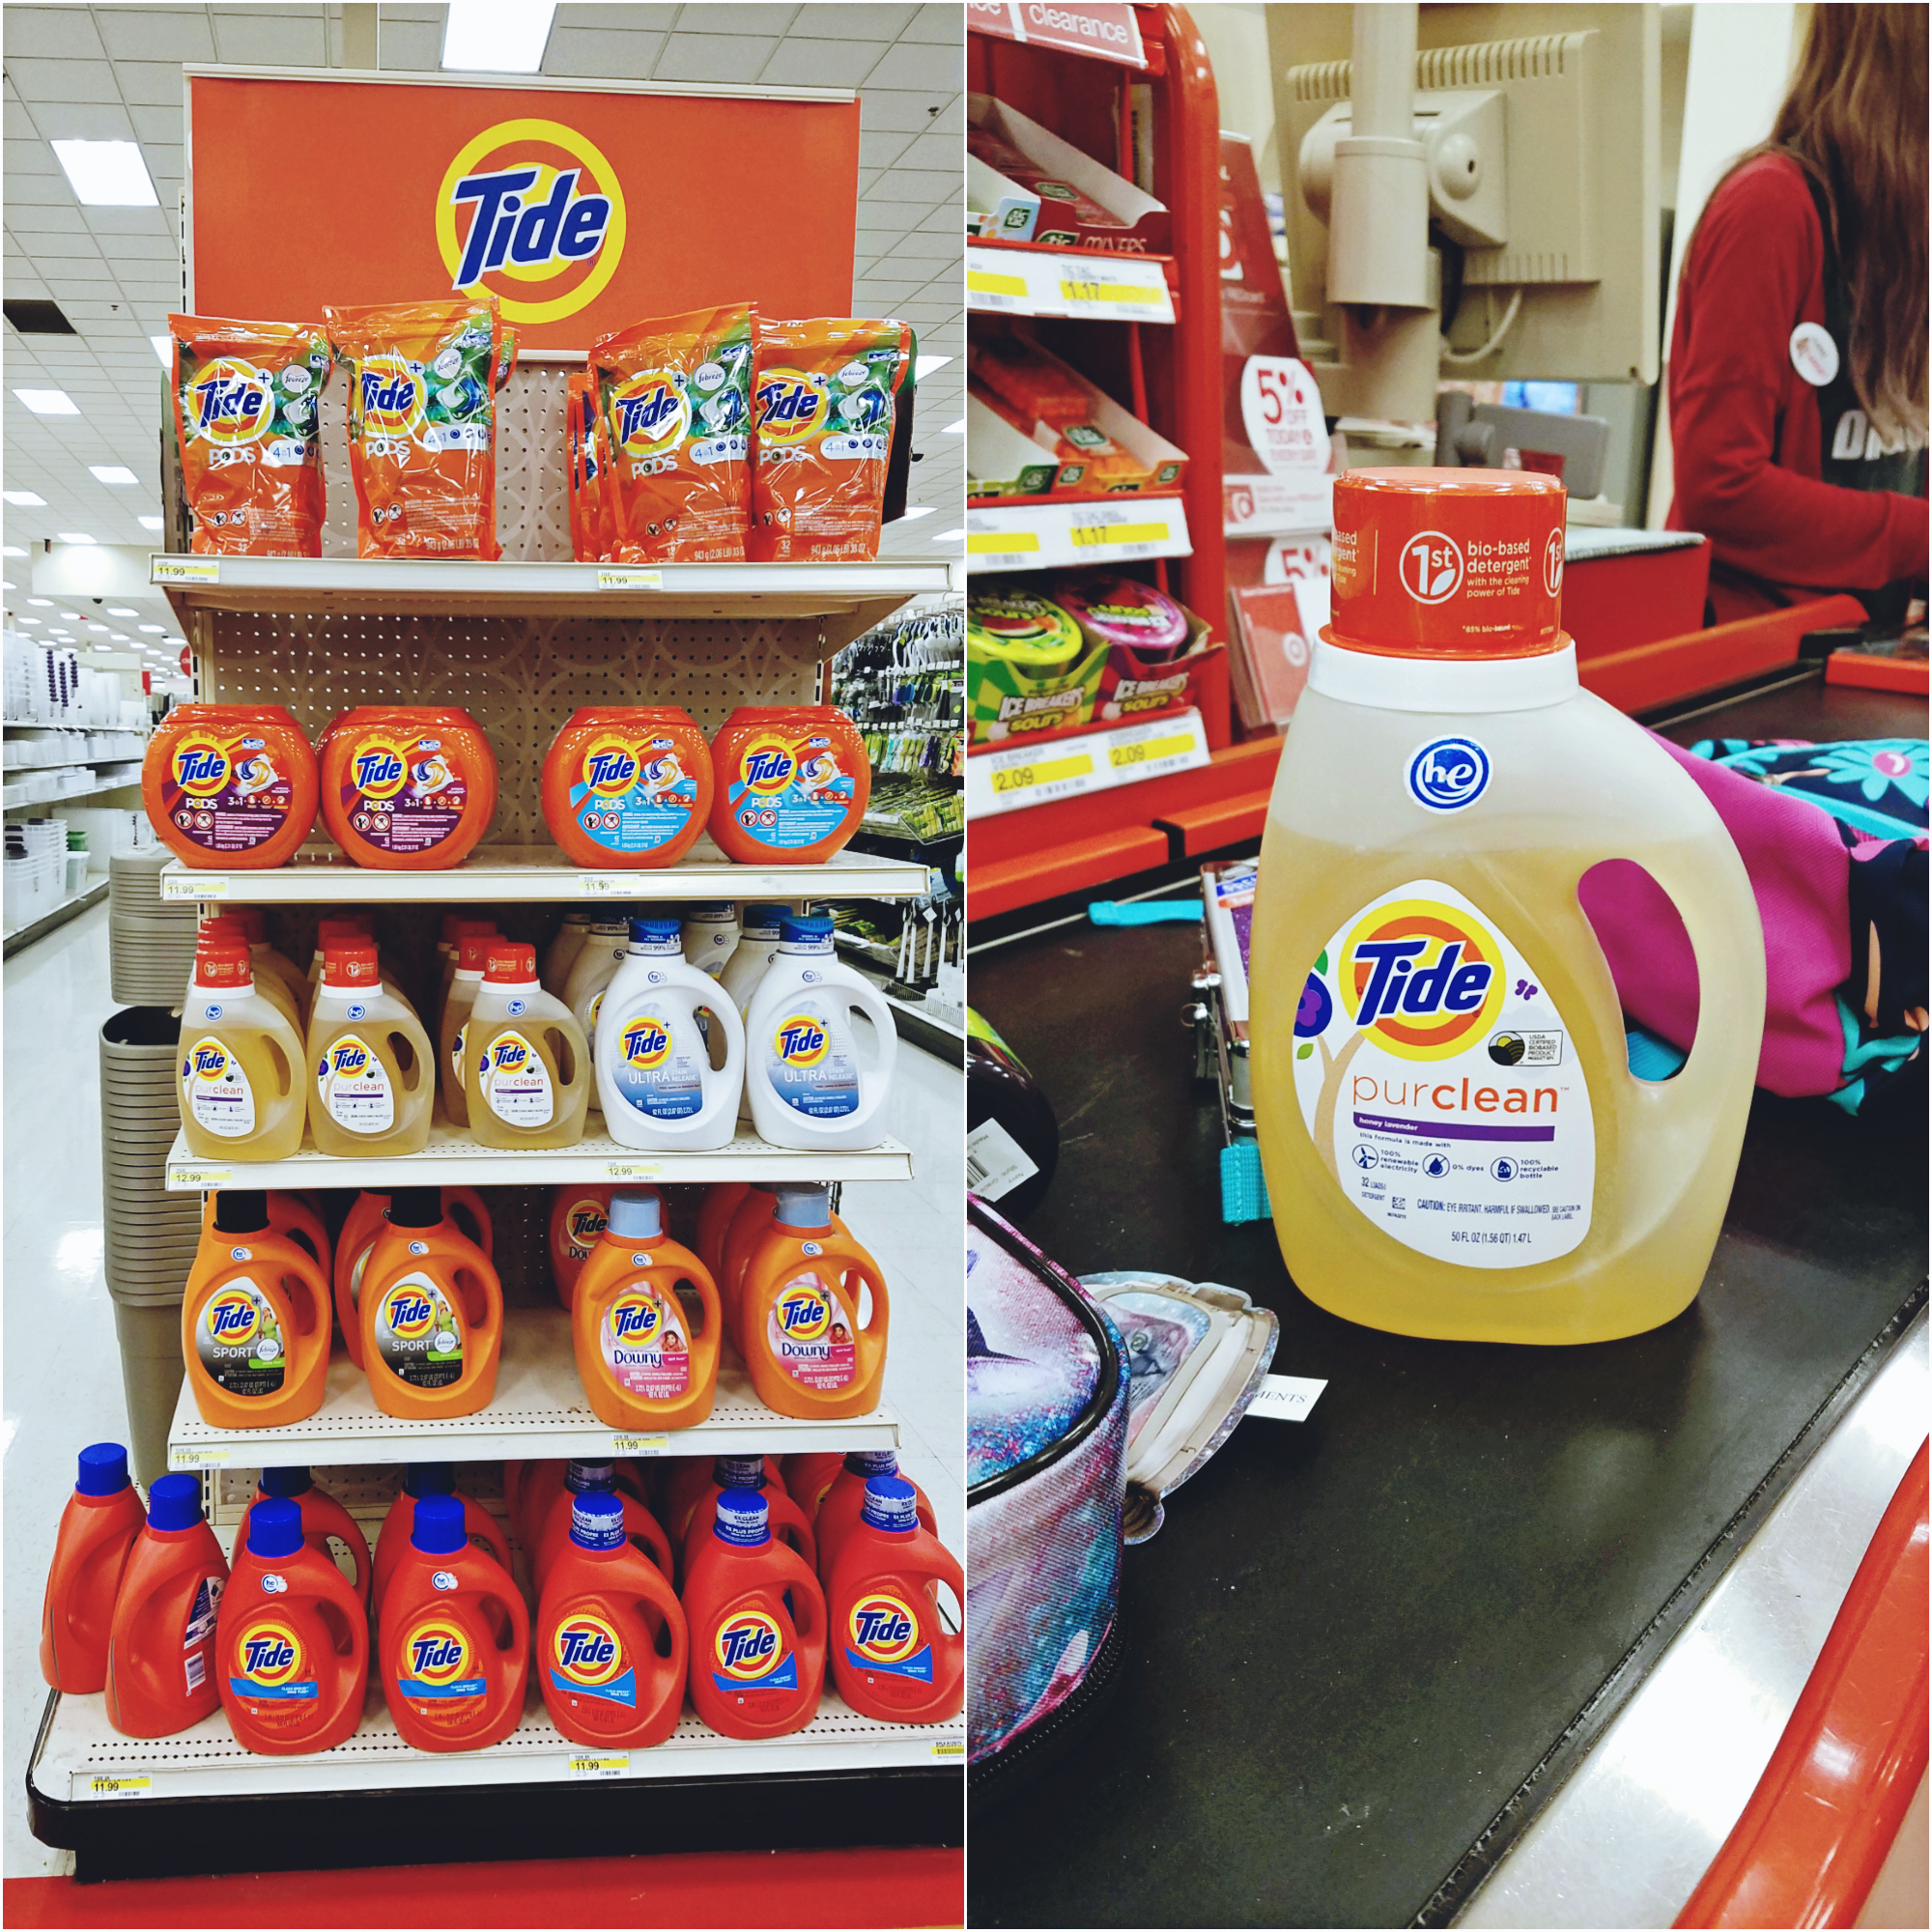 Taking Laundry to a Whole New Level with Tide purclean